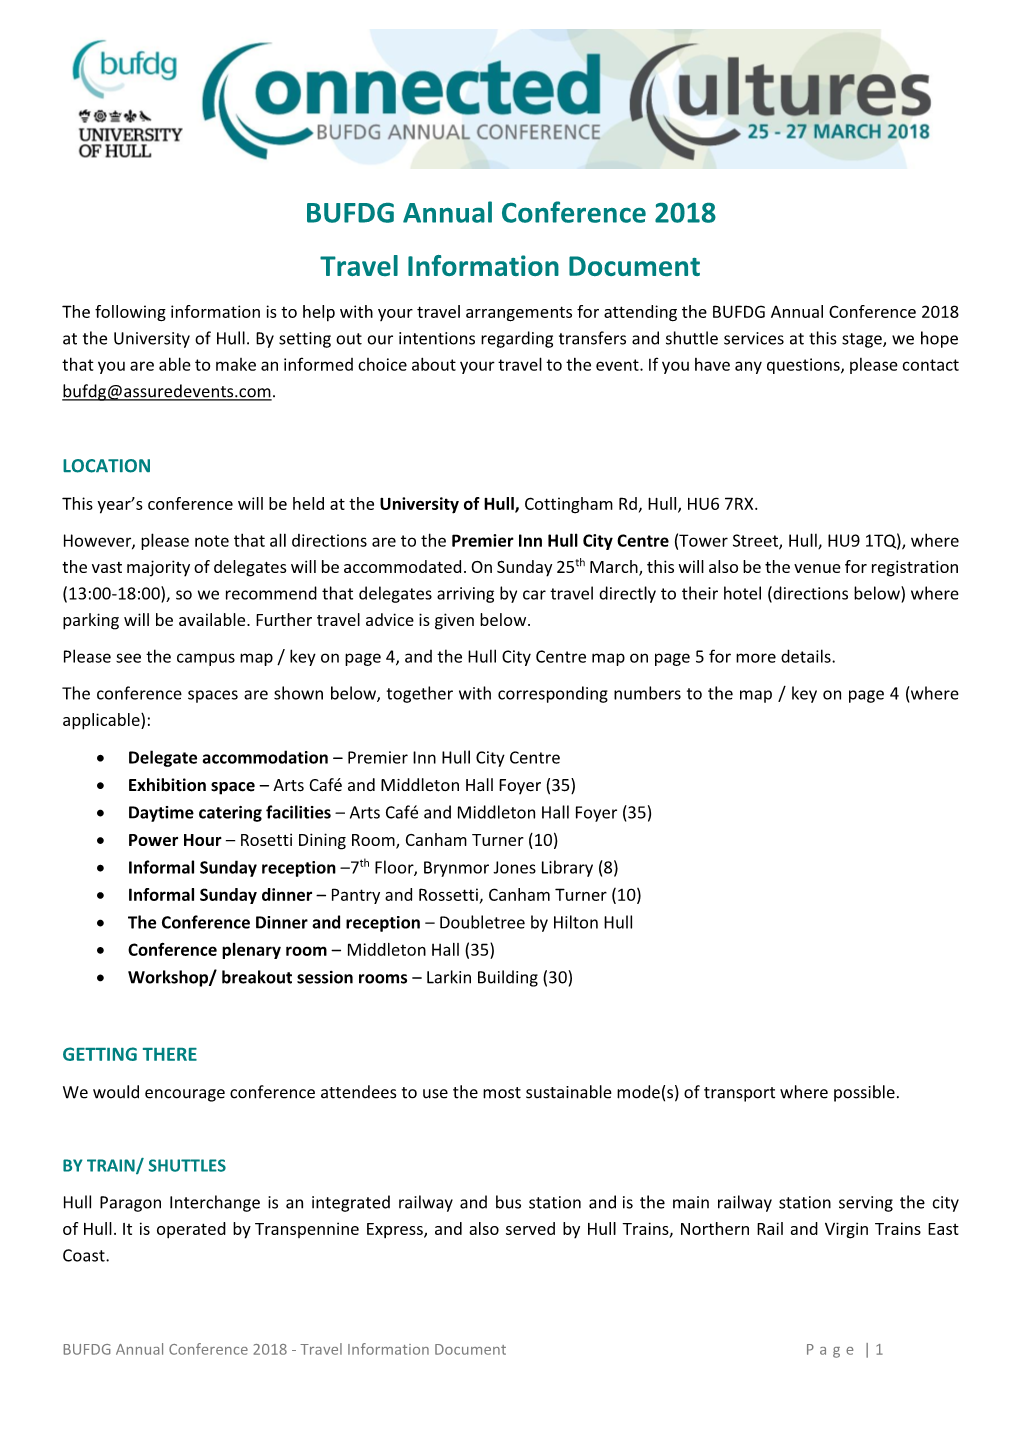 BUFDG Annual Conference 2018 Travel Information Document